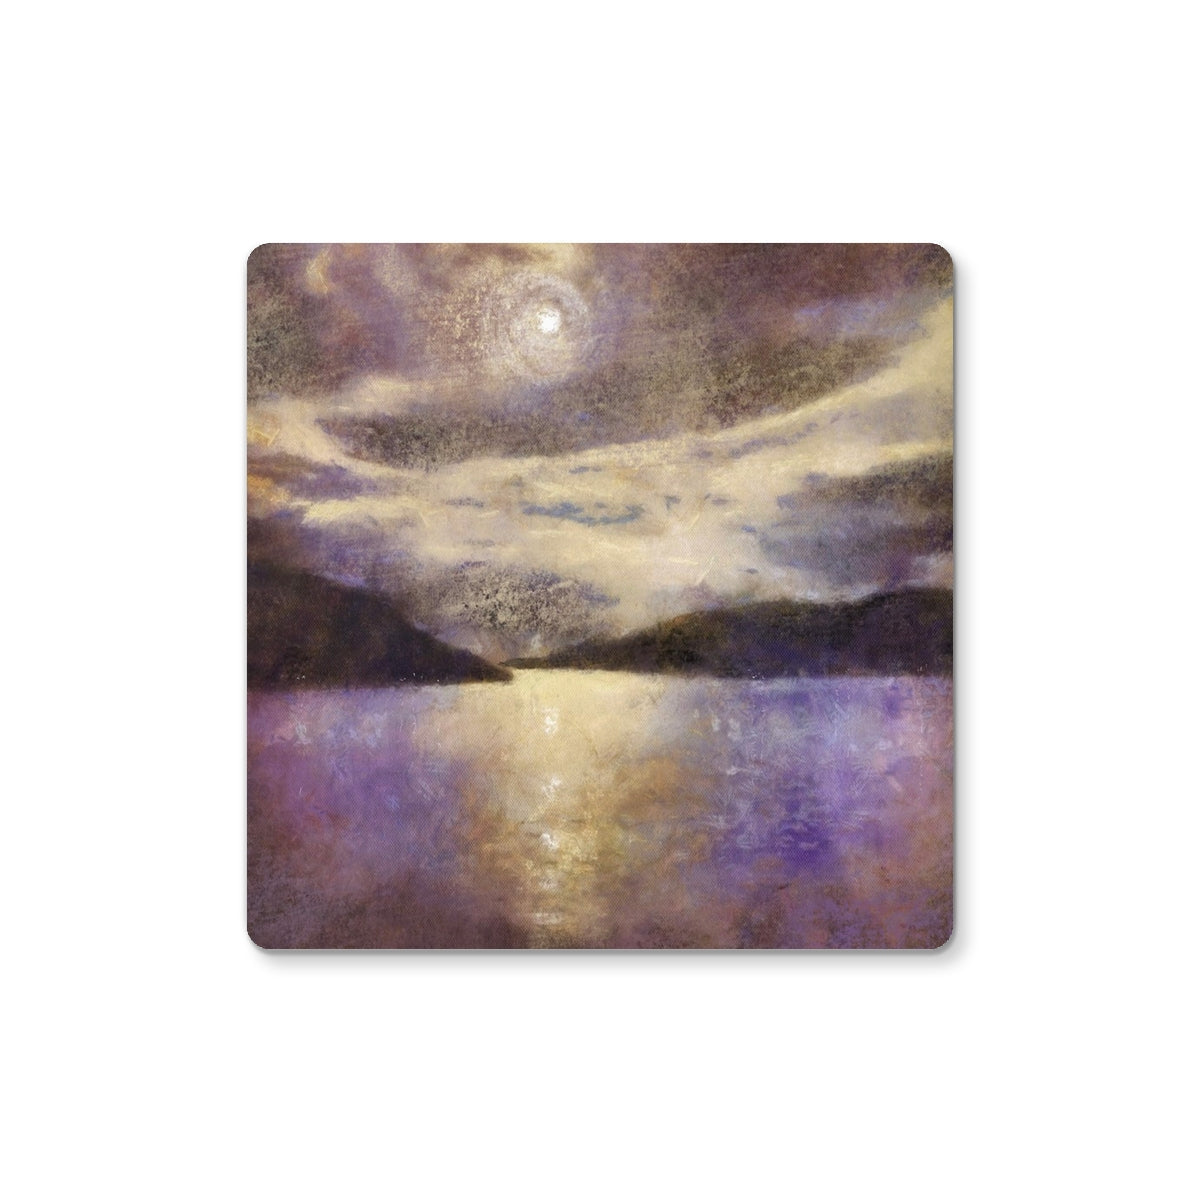 Moonlight Meets Lewis & Harris Art Gifts Coaster-Coasters-Hebridean Islands Art Gallery-4 Coasters-Paintings, Prints, Homeware, Art Gifts From Scotland By Scottish Artist Kevin Hunter